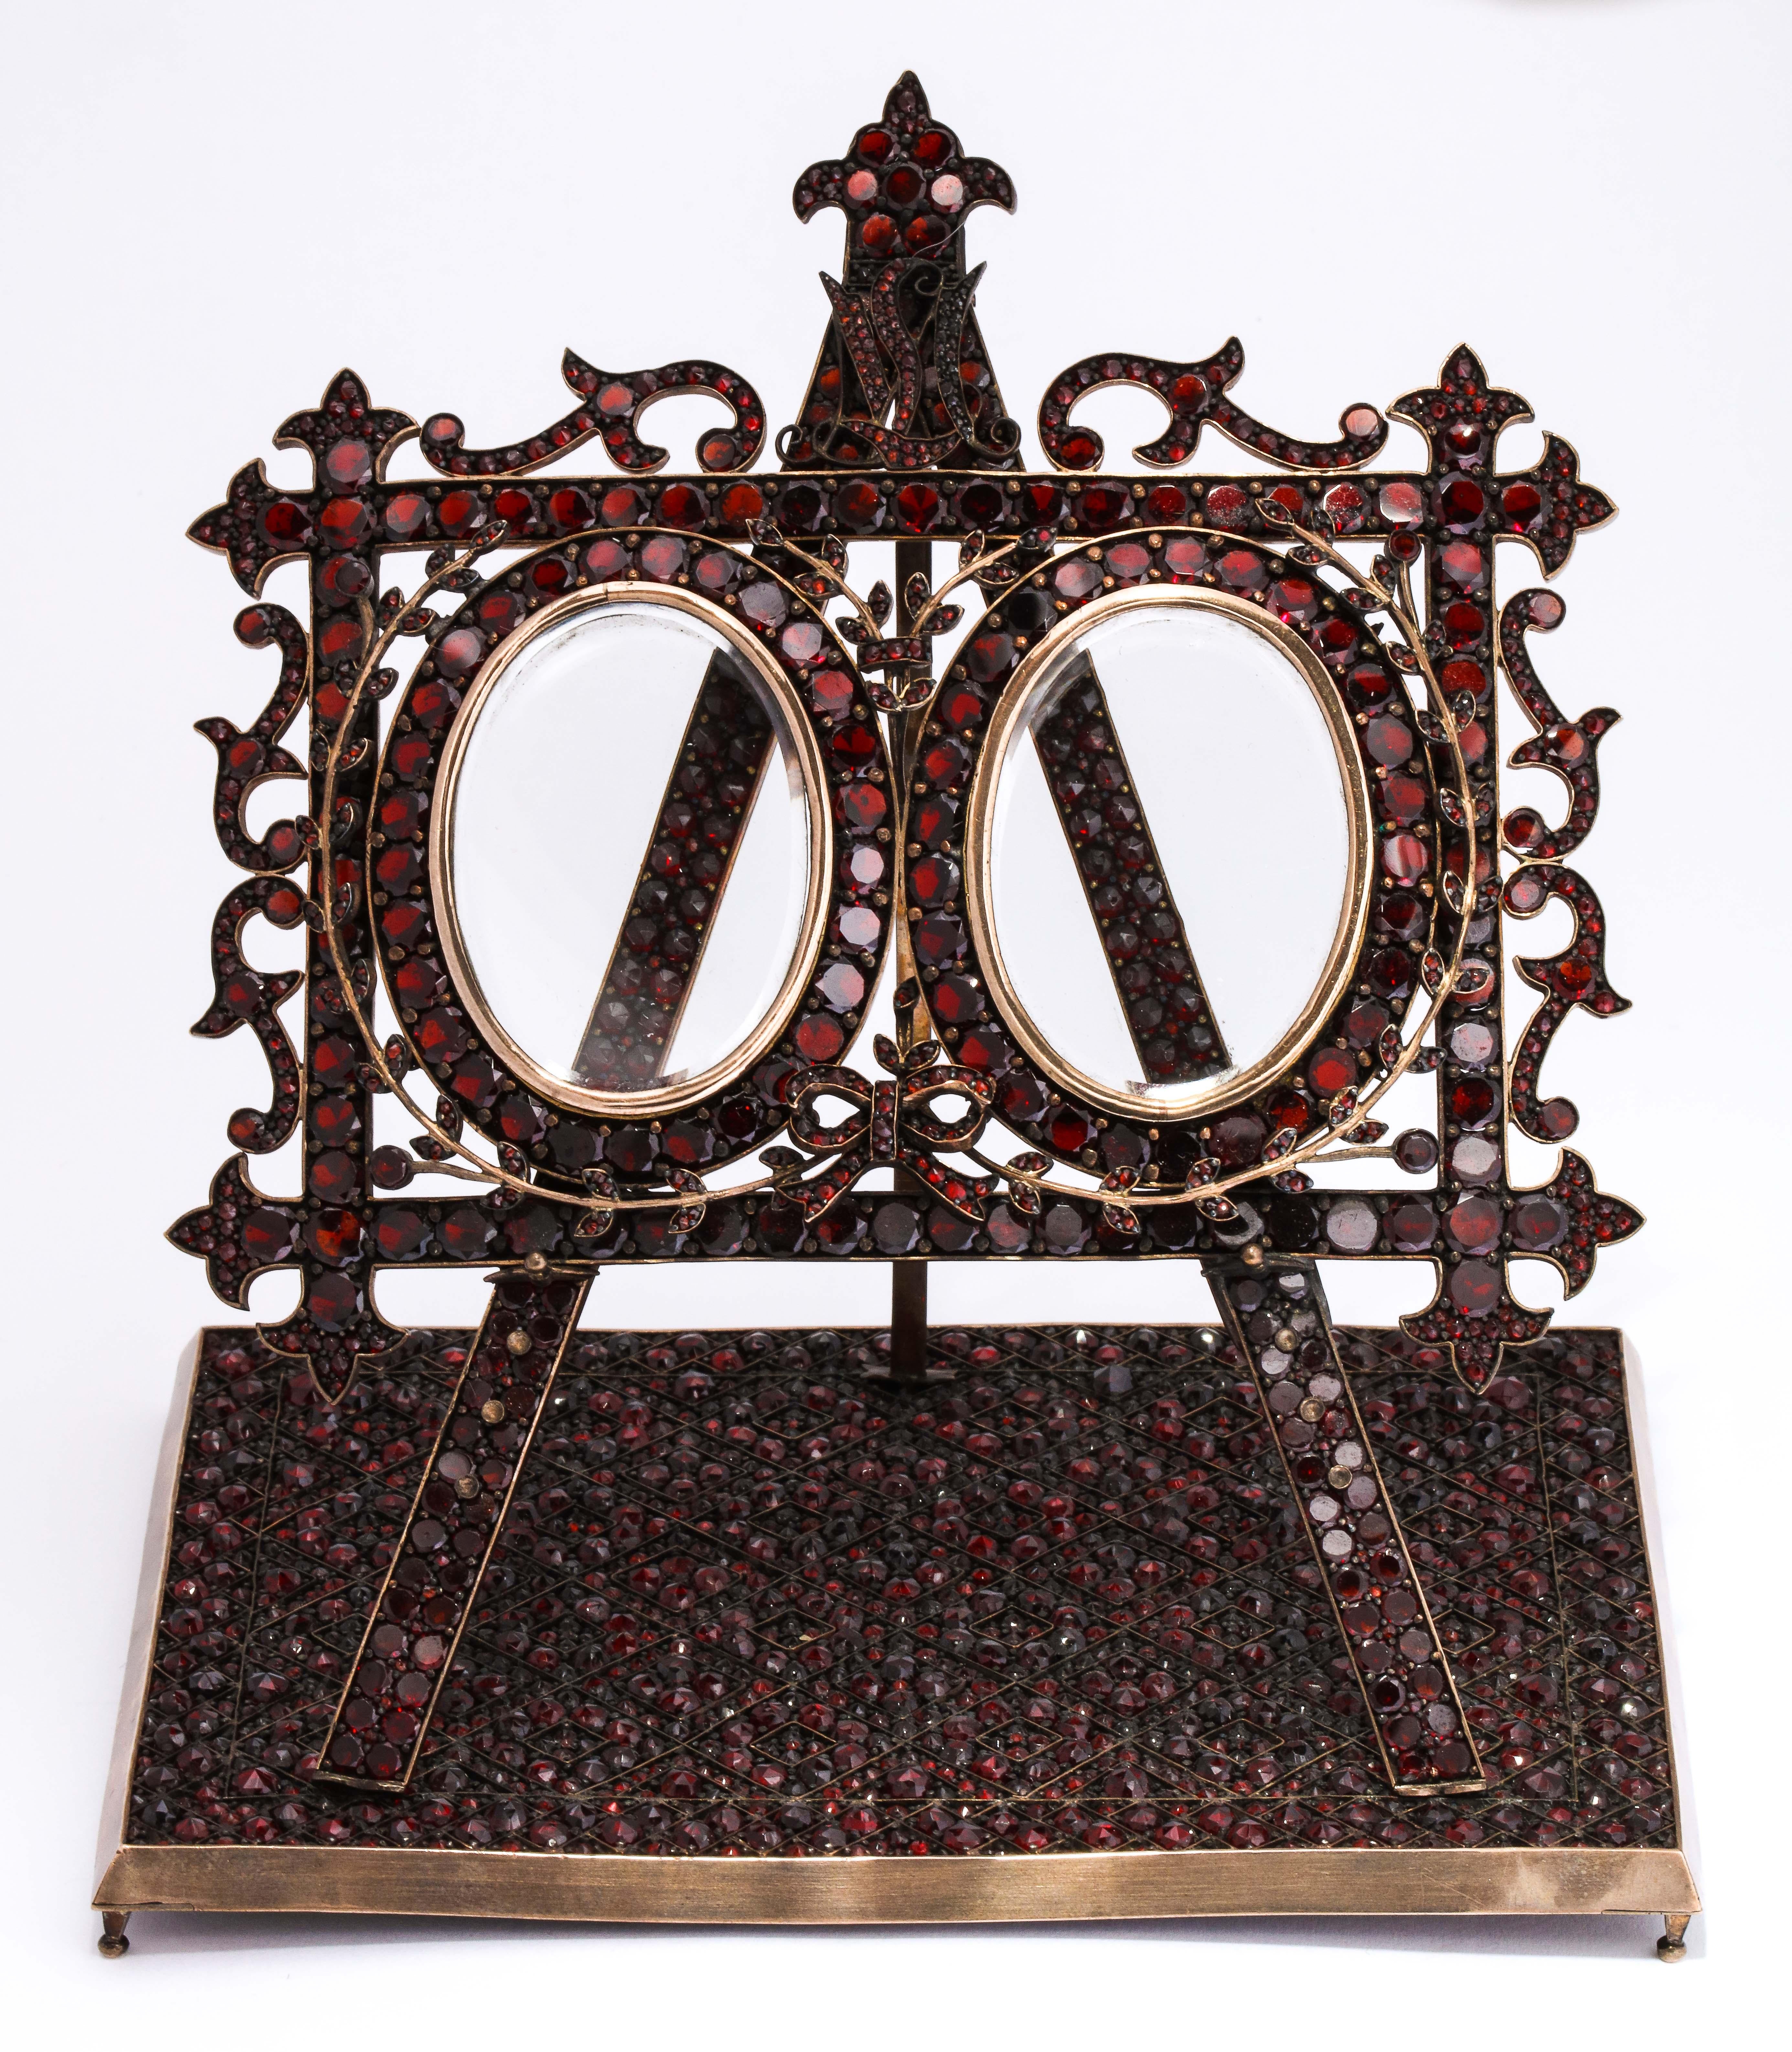  We offer you a luxurious and highly unusual 19th century double photo frame covered entirely with faceted Bohemian garnets designed as an easel standing on a geometric oriental carpet the oval openings holding beveled glass inserts. Customized with